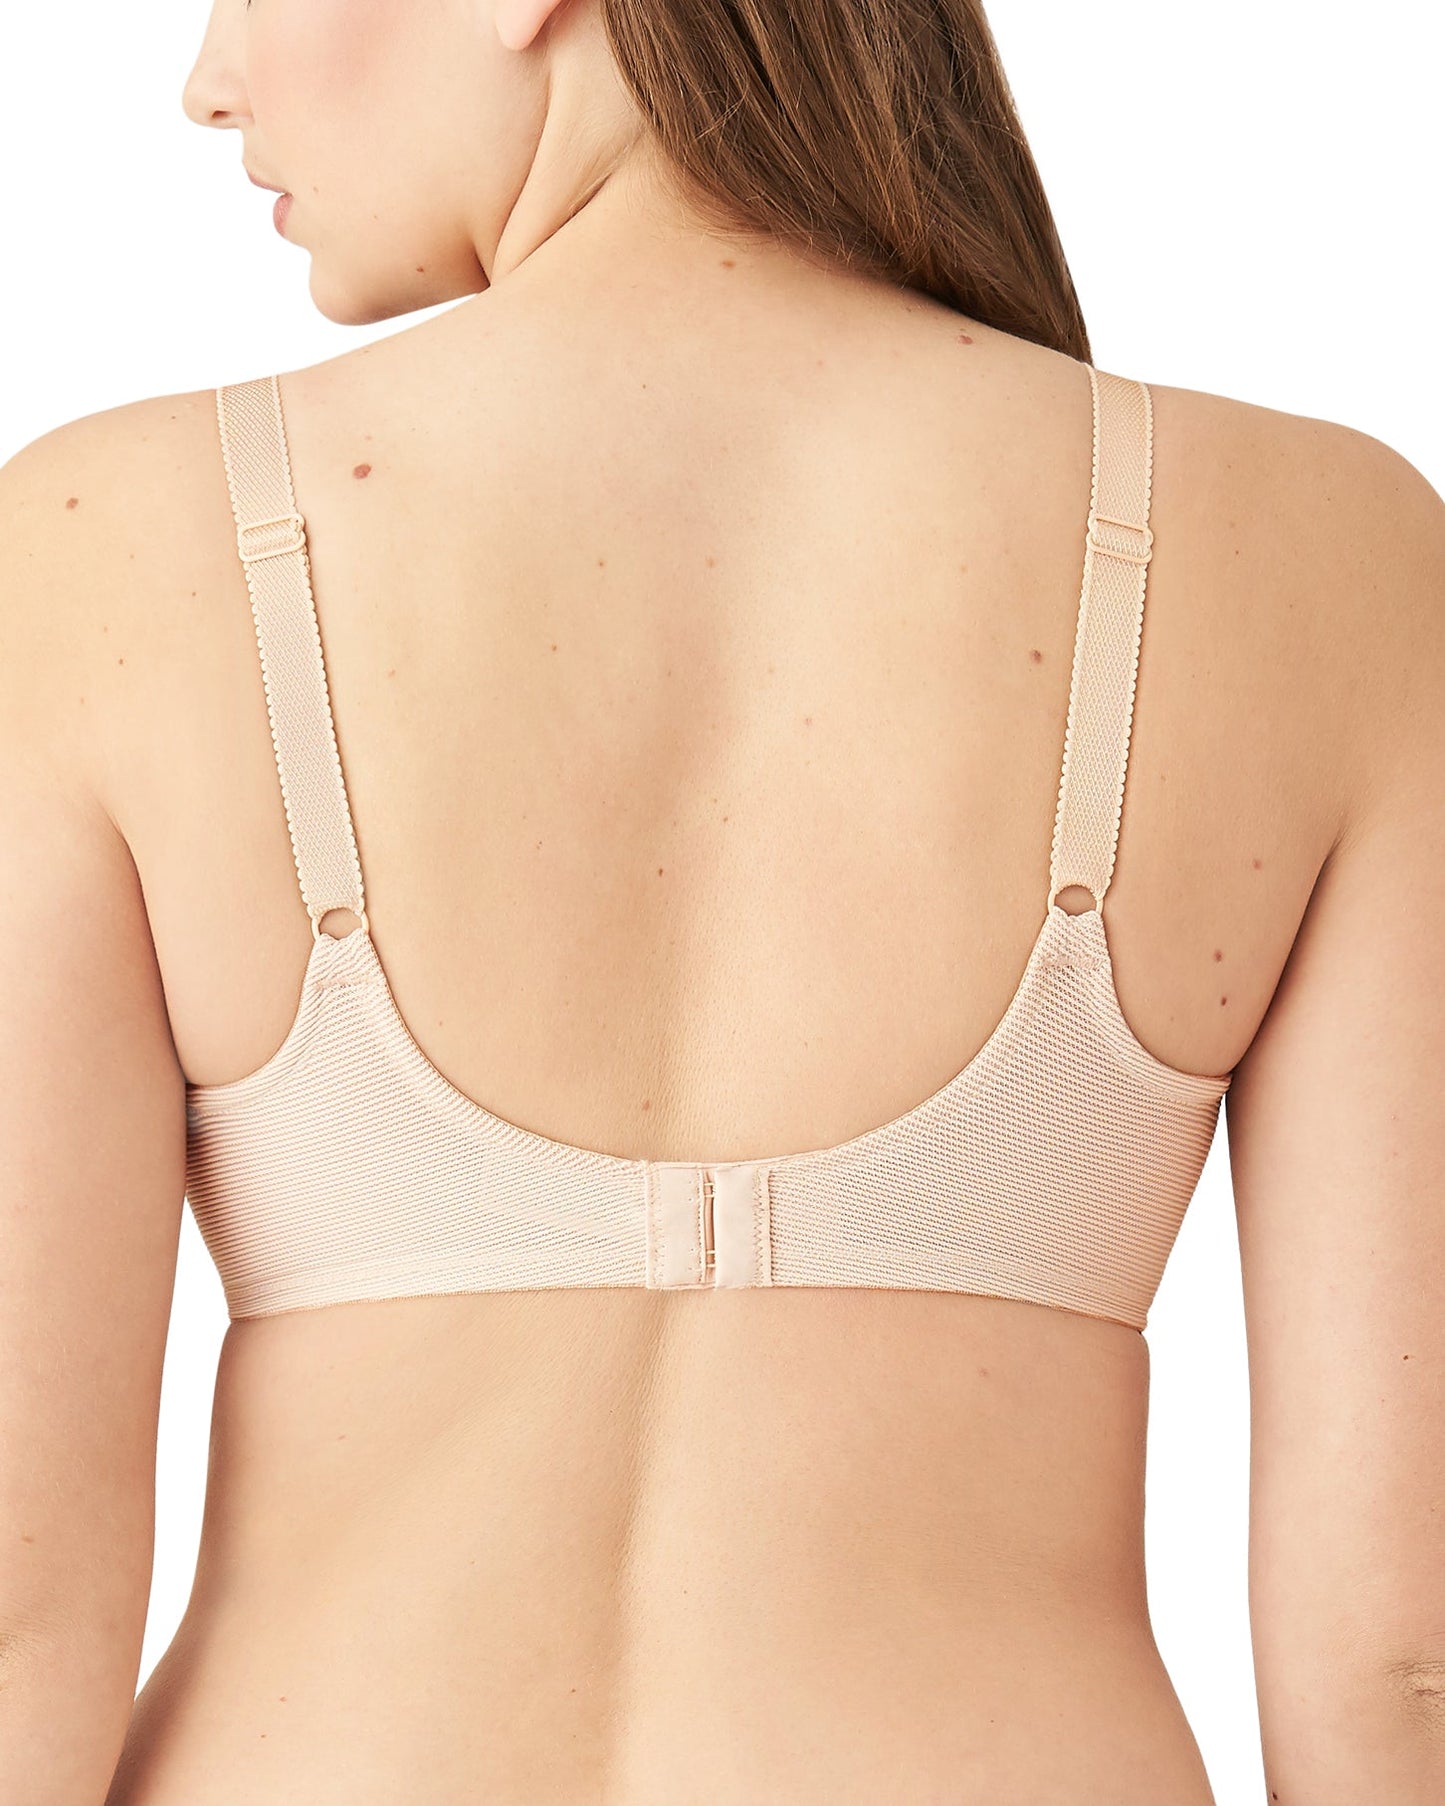 Wacoal Visual Effects Minimizer Underwire Bra (More colors available) - 857210 - Sand